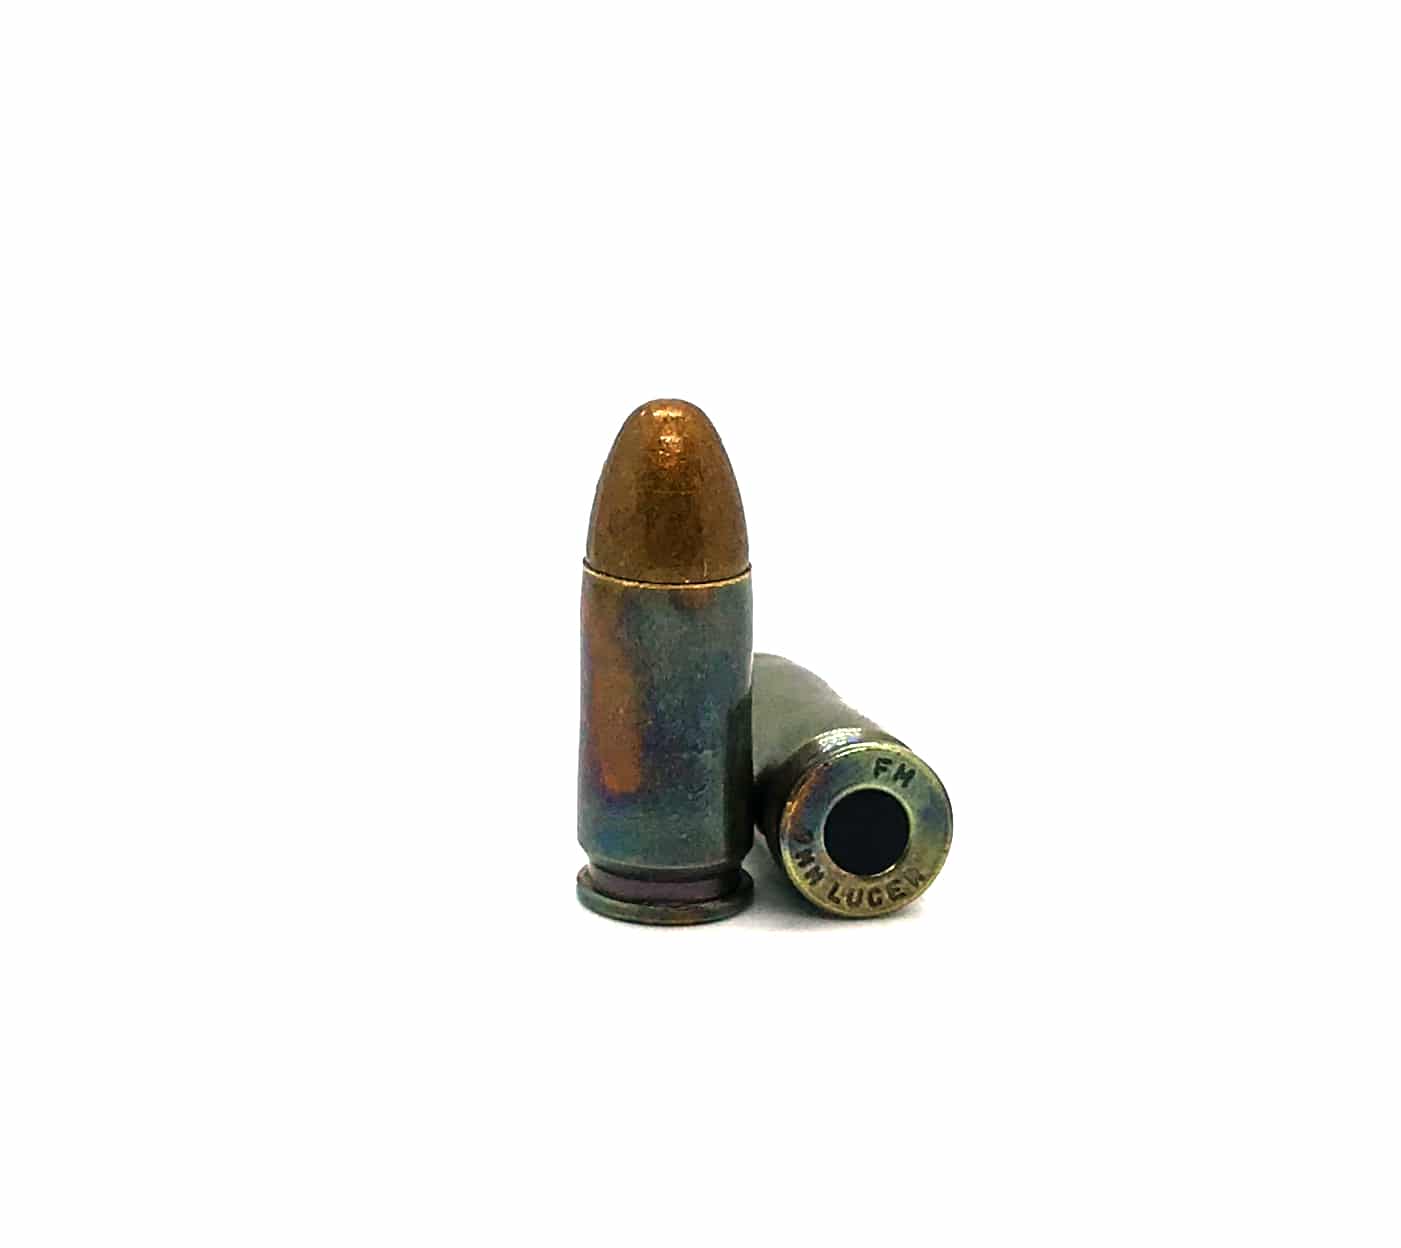 9MM LUGER SNAP CAPS DUMMY TRAINING ROUNDS SET OF 10 